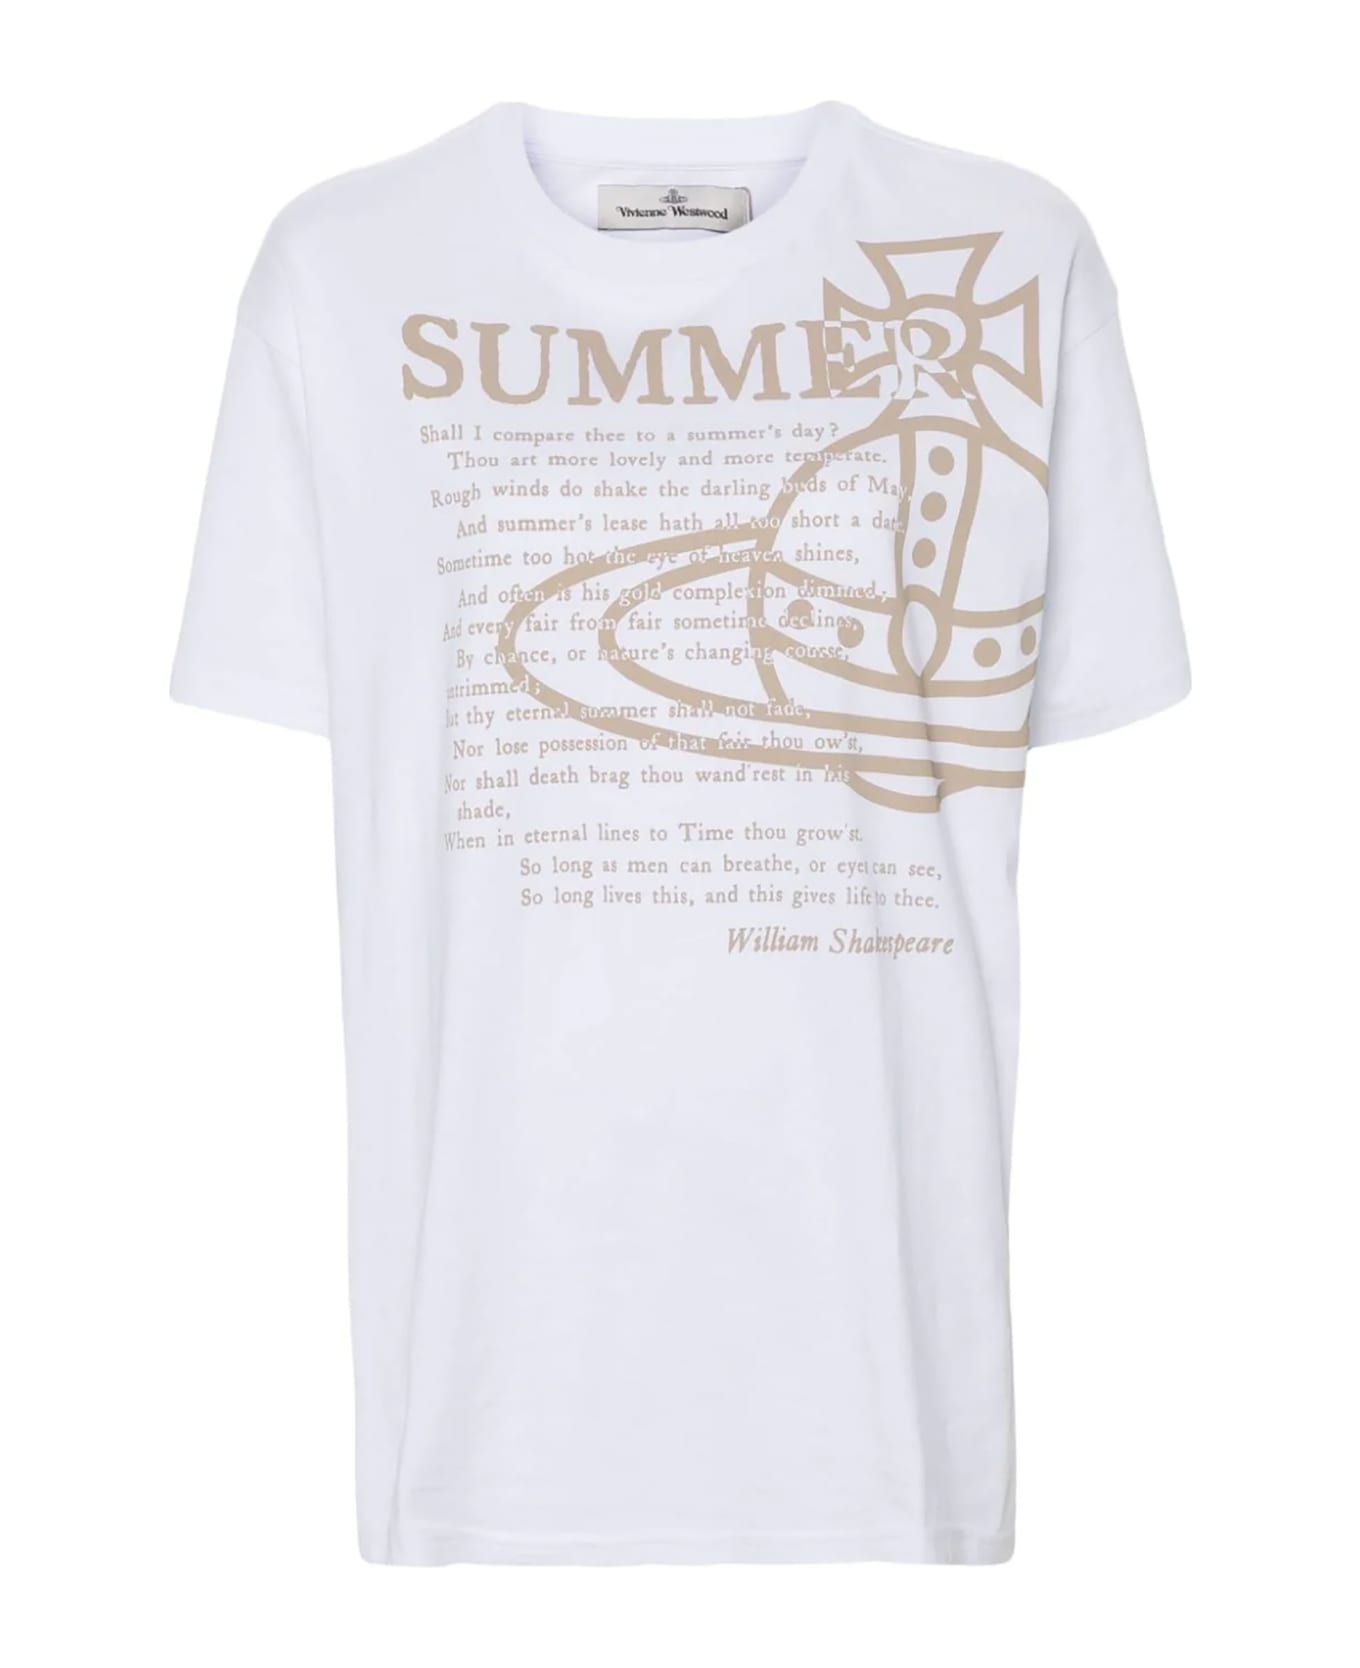 Vivienne Westwood T-shirts And Polos White - White シャツ